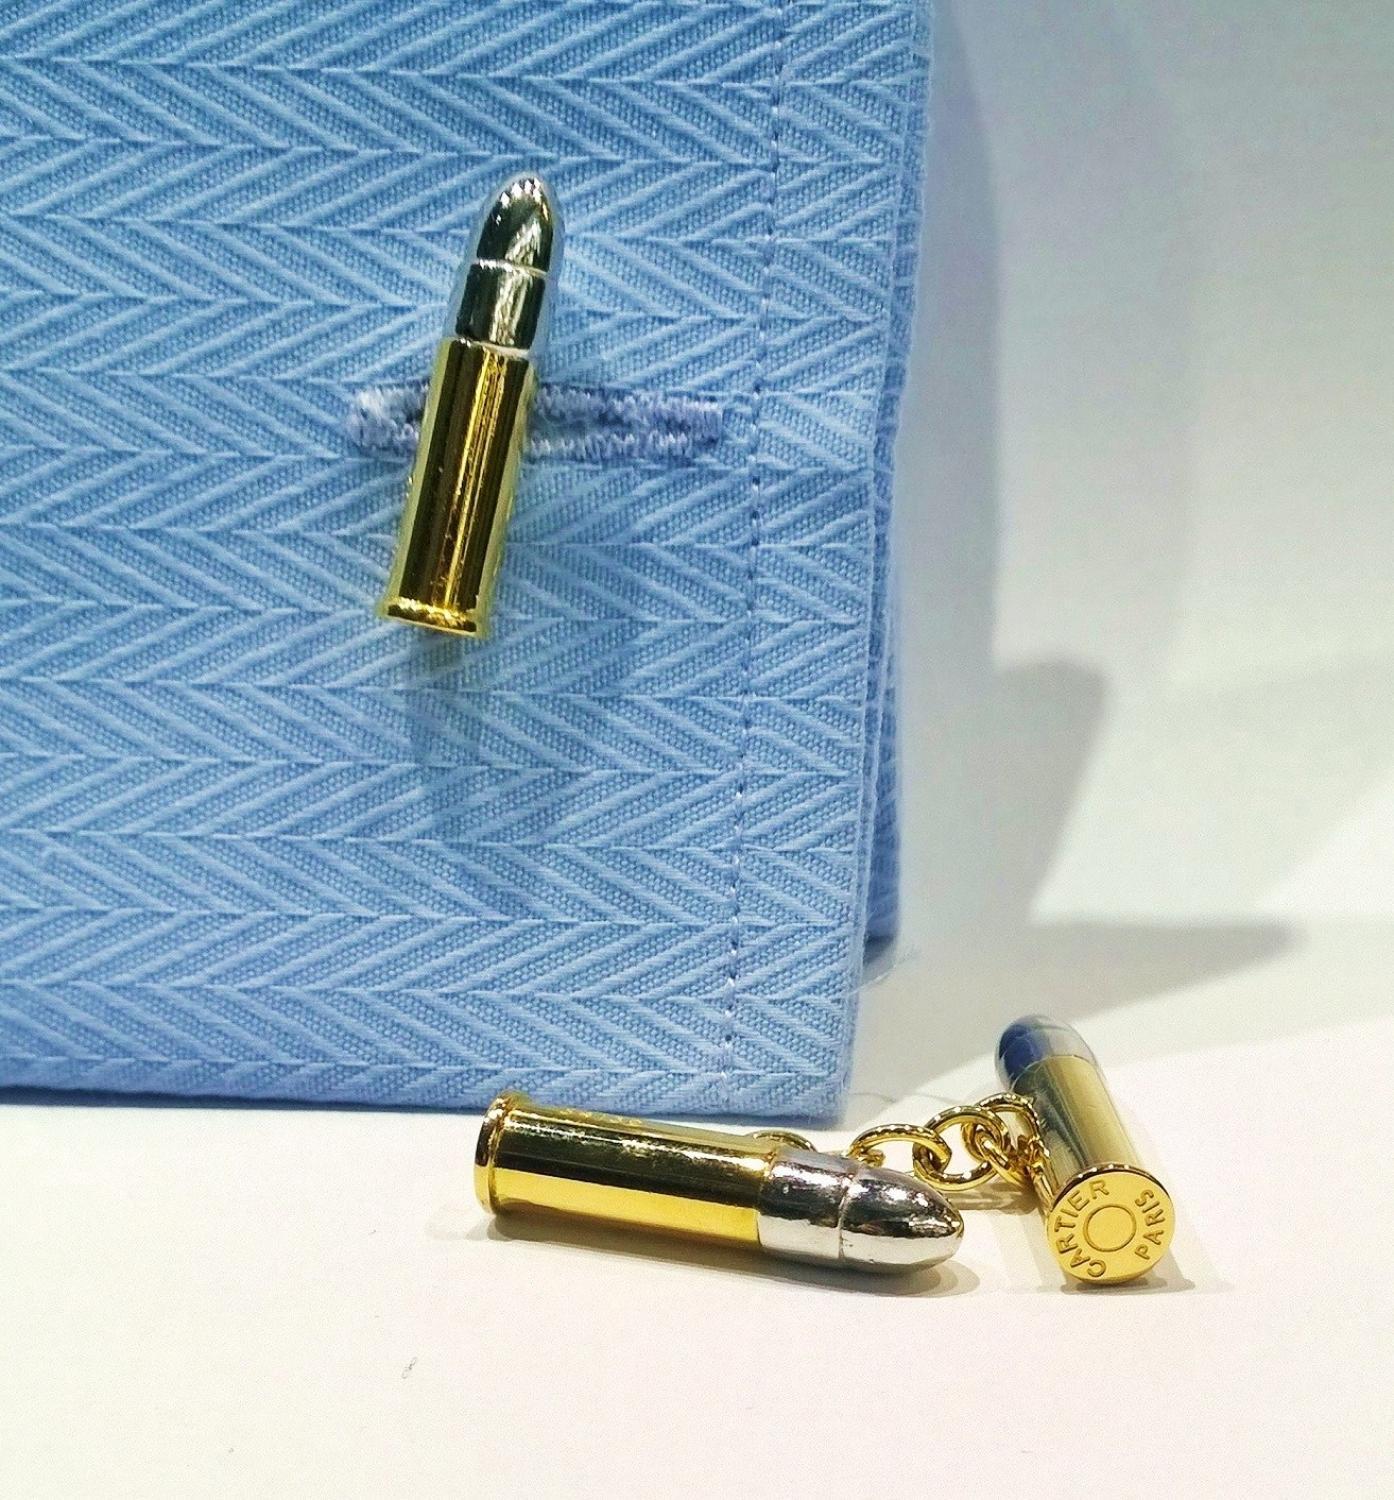 These are Gorgeous CARTIER cufflinks from our Estate department.

These CARTIER cuff links are from Vintage 1960's.

The Bullet Cases are done in 18K Yellow gold and the Tips are 18K White gold. They are Designed as .22 caliber Bullets joined by an